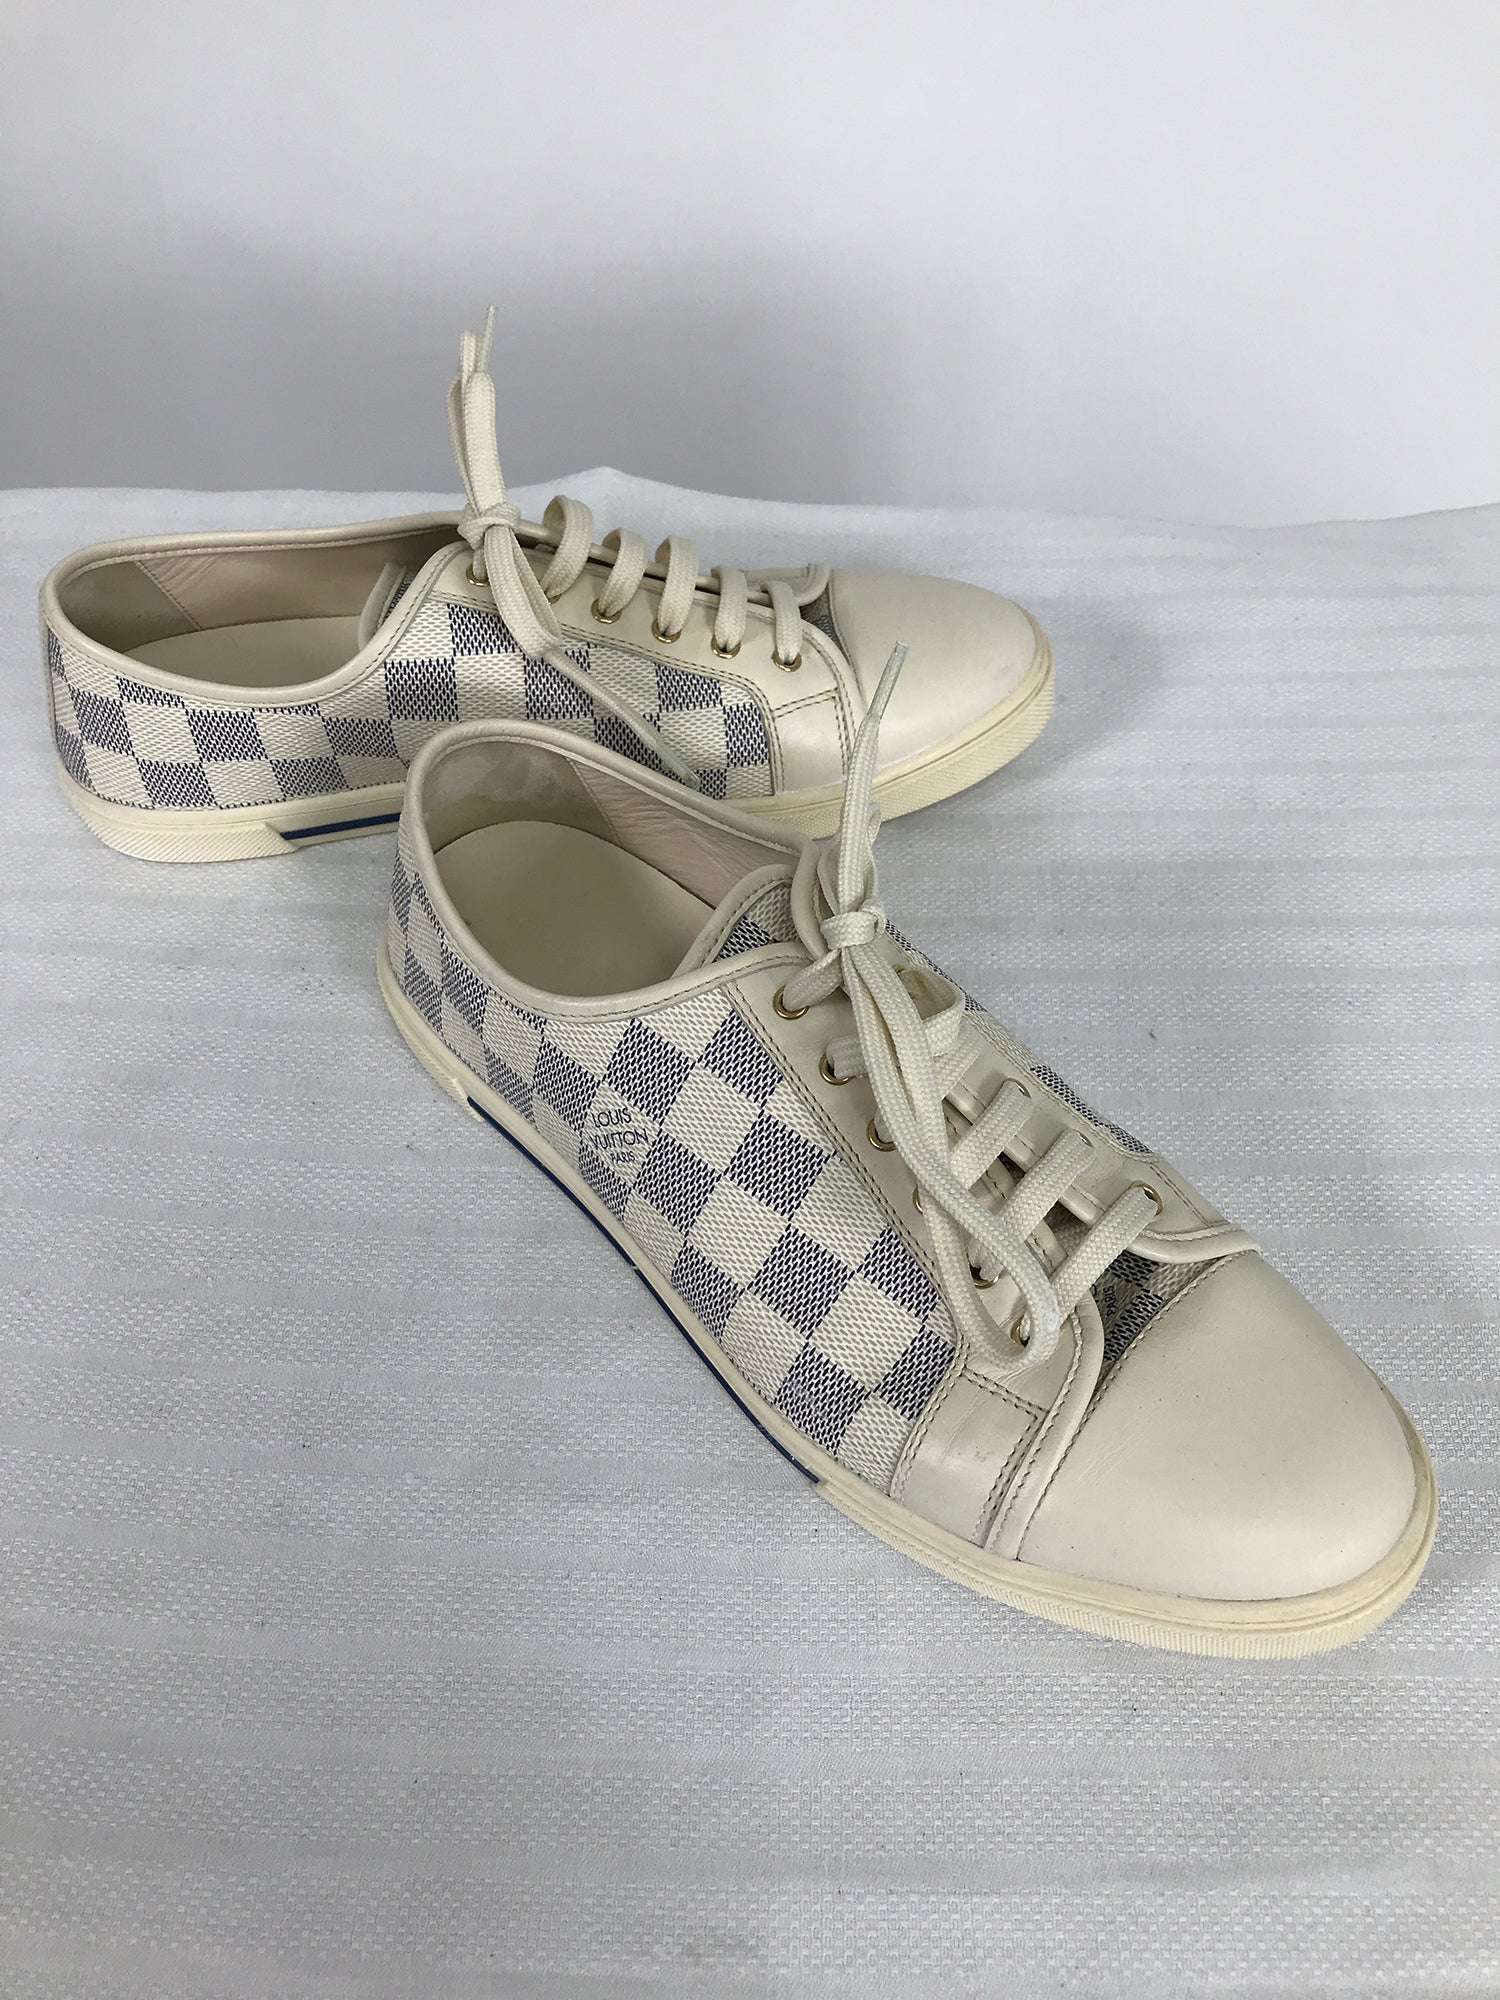 Sold HP🎉Louis Vuitton Damier leather sneakers